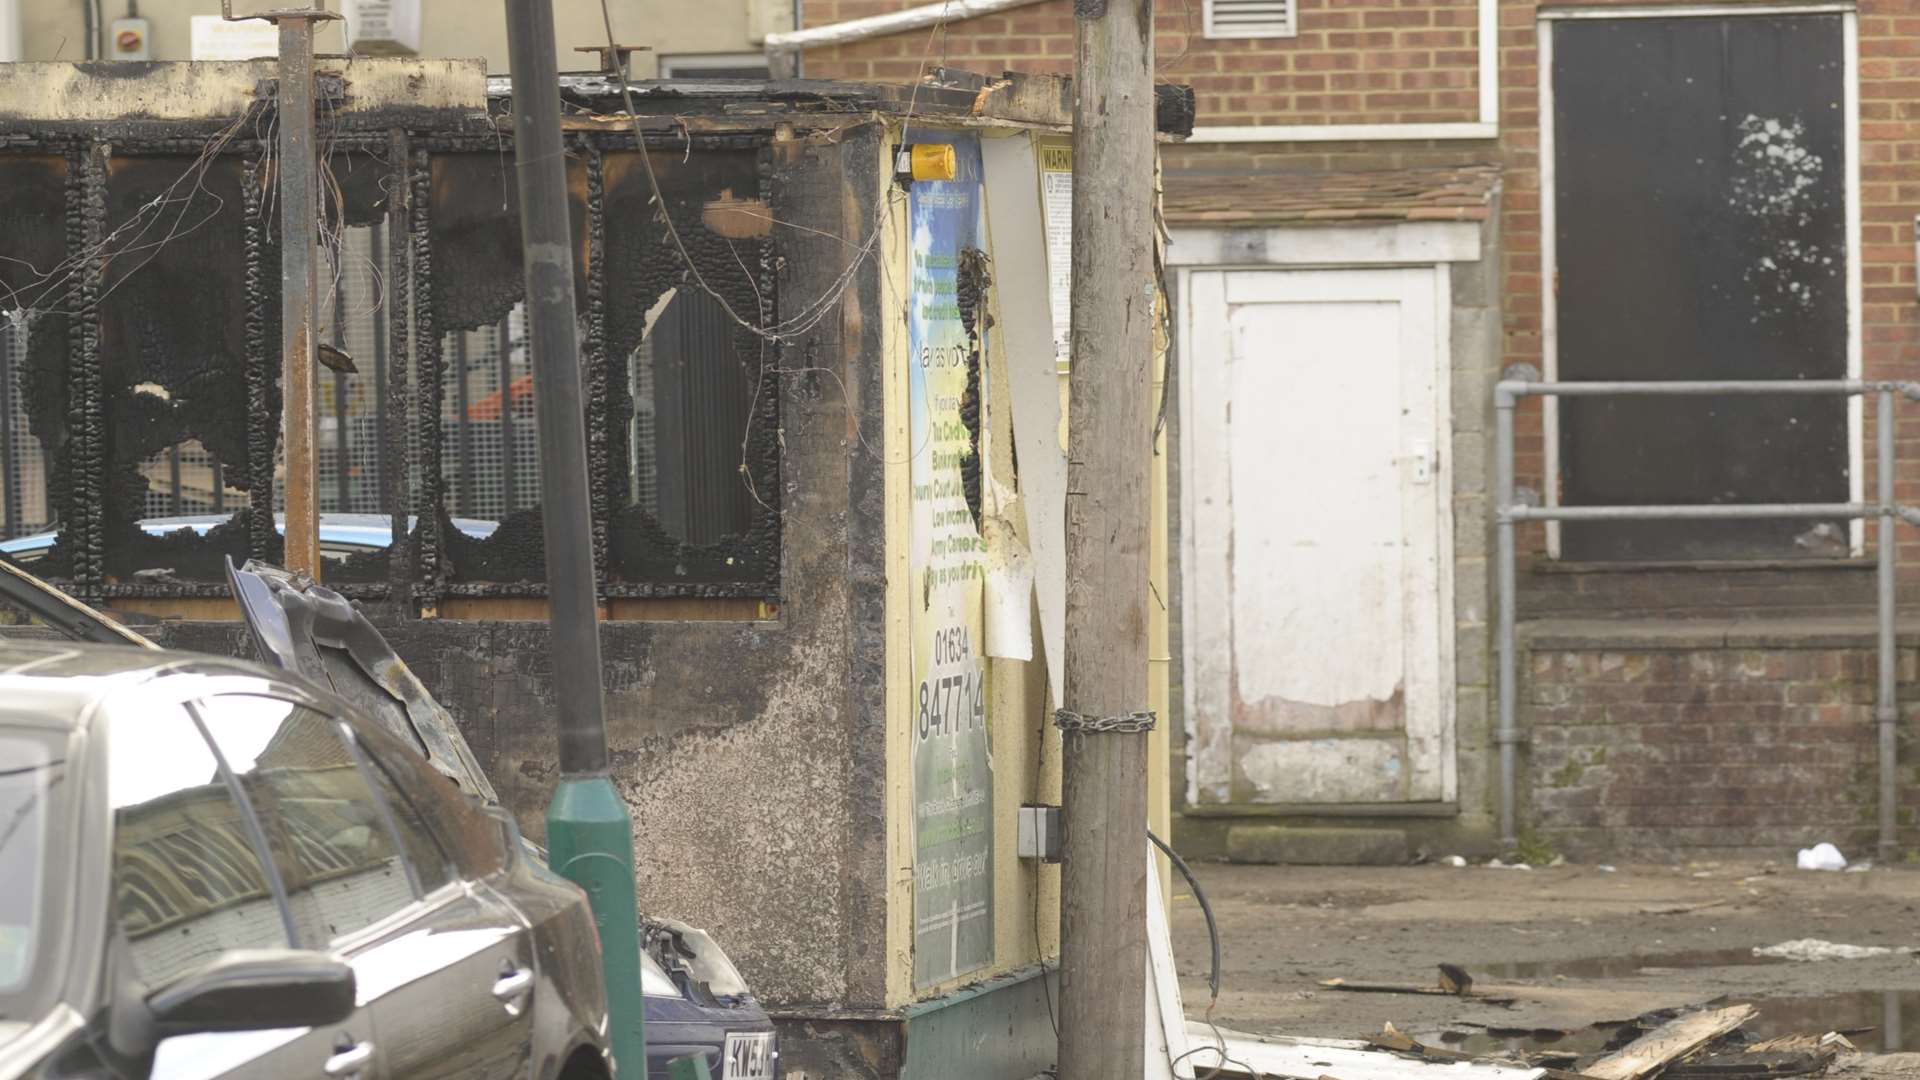 Two people, a man and a boy have been charged in connection with an arson attack.